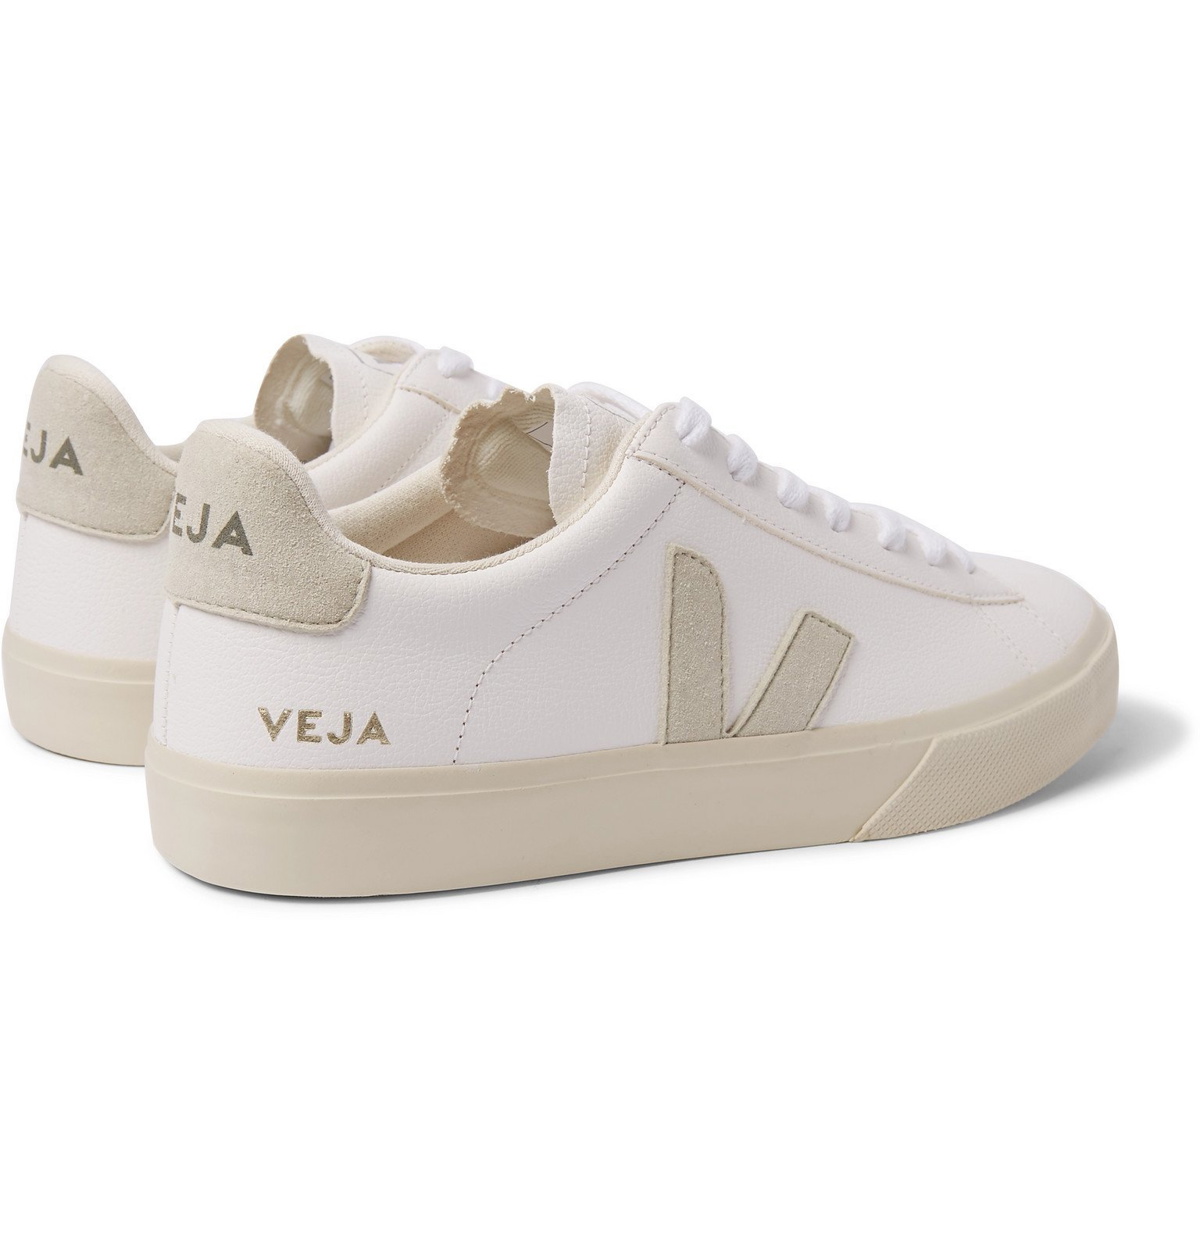 Veja - Campo Suede-Trimmed Leather Sneakers - White VEJA